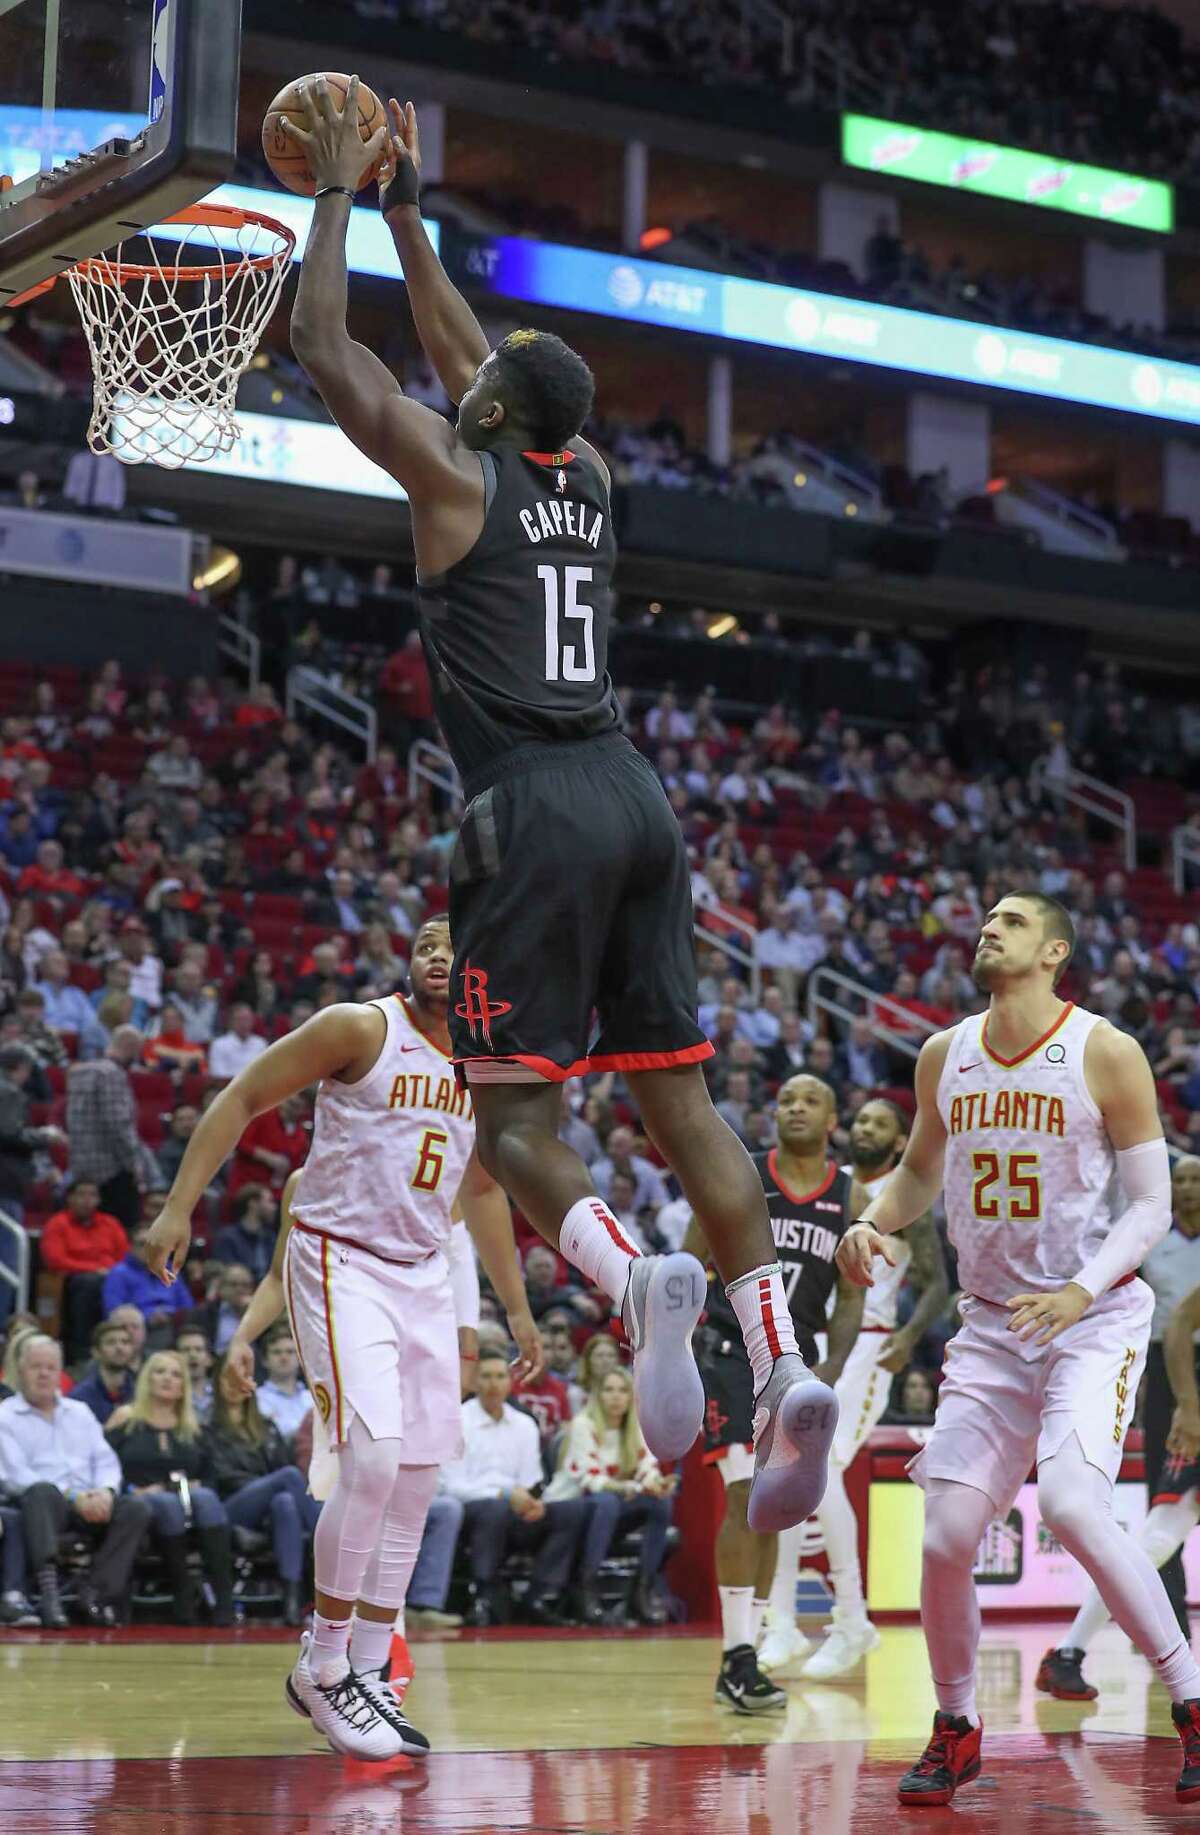 Houston Rockets center Clint Capela (15) dunks for two during the first half of an NBA basketball game at Toyota Center on Monday, Feb. 25, 2019, in Houston.